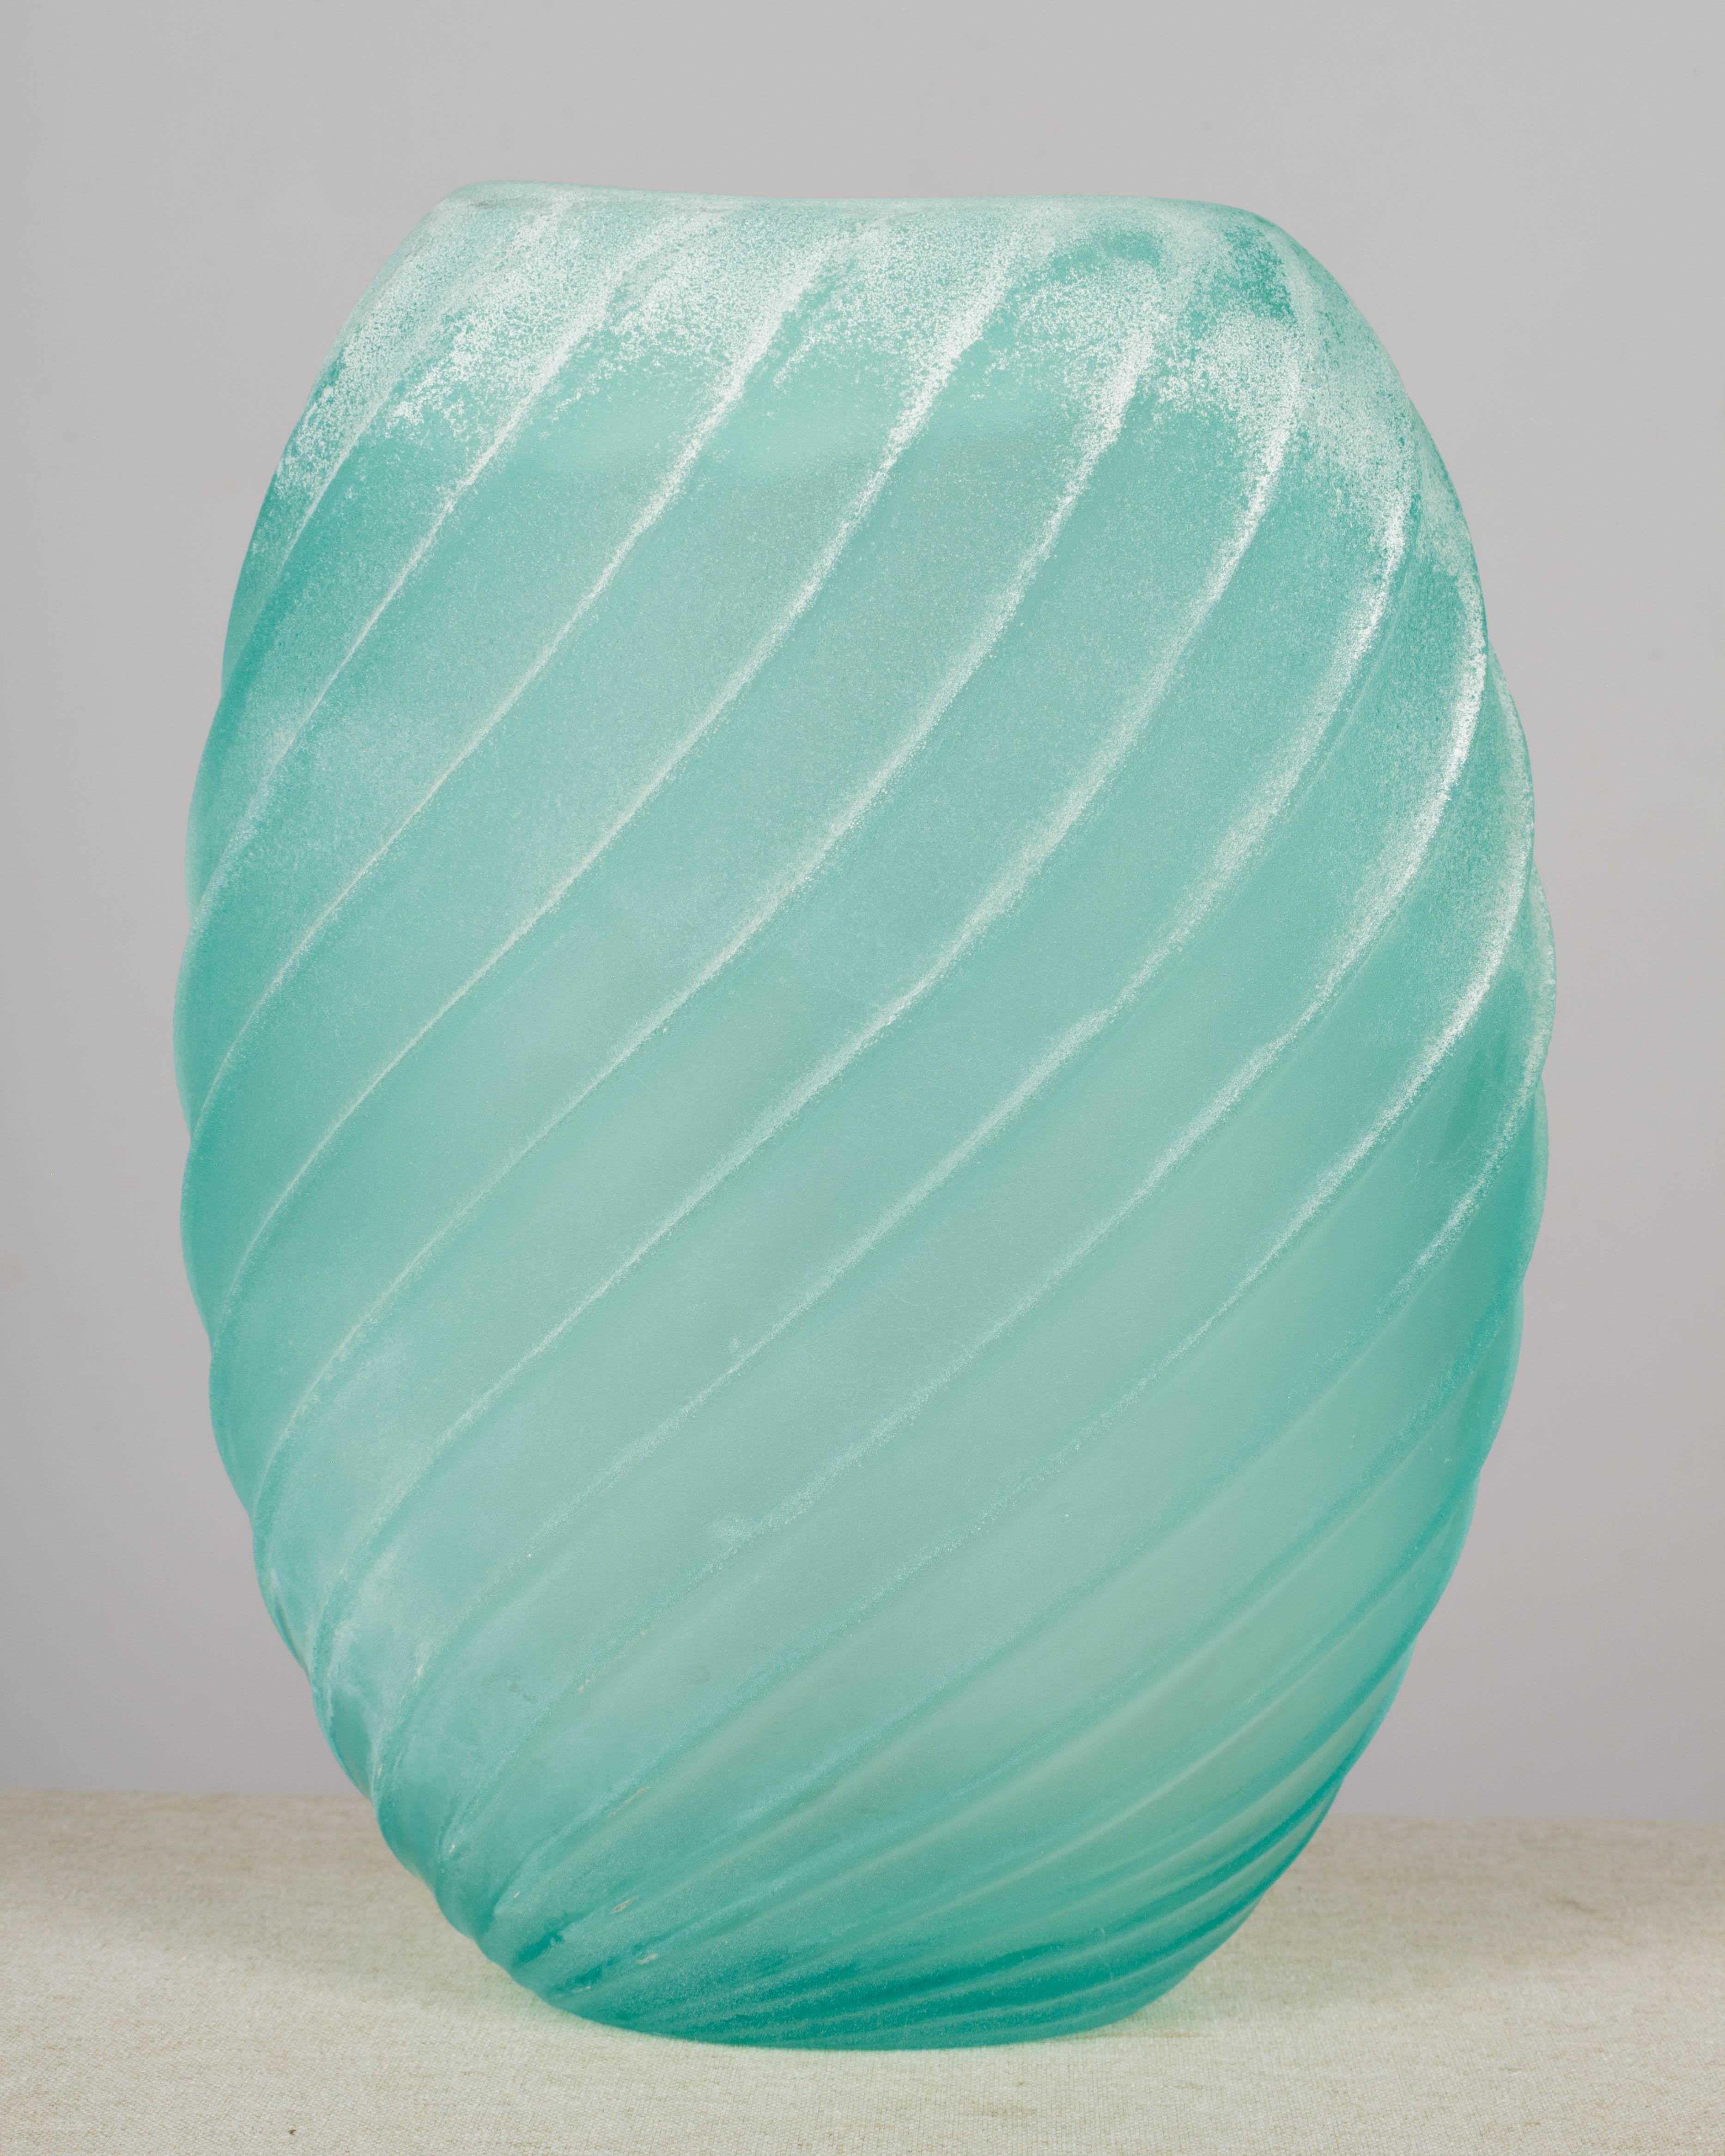 A large murano scavo glass vase by Gino Cenedese with oval form and swirl indentation. Beautiful aqua, or seafoam green color and rough texture. Scavo is a technique used to create an effect similar to weathering, imitating glass from an